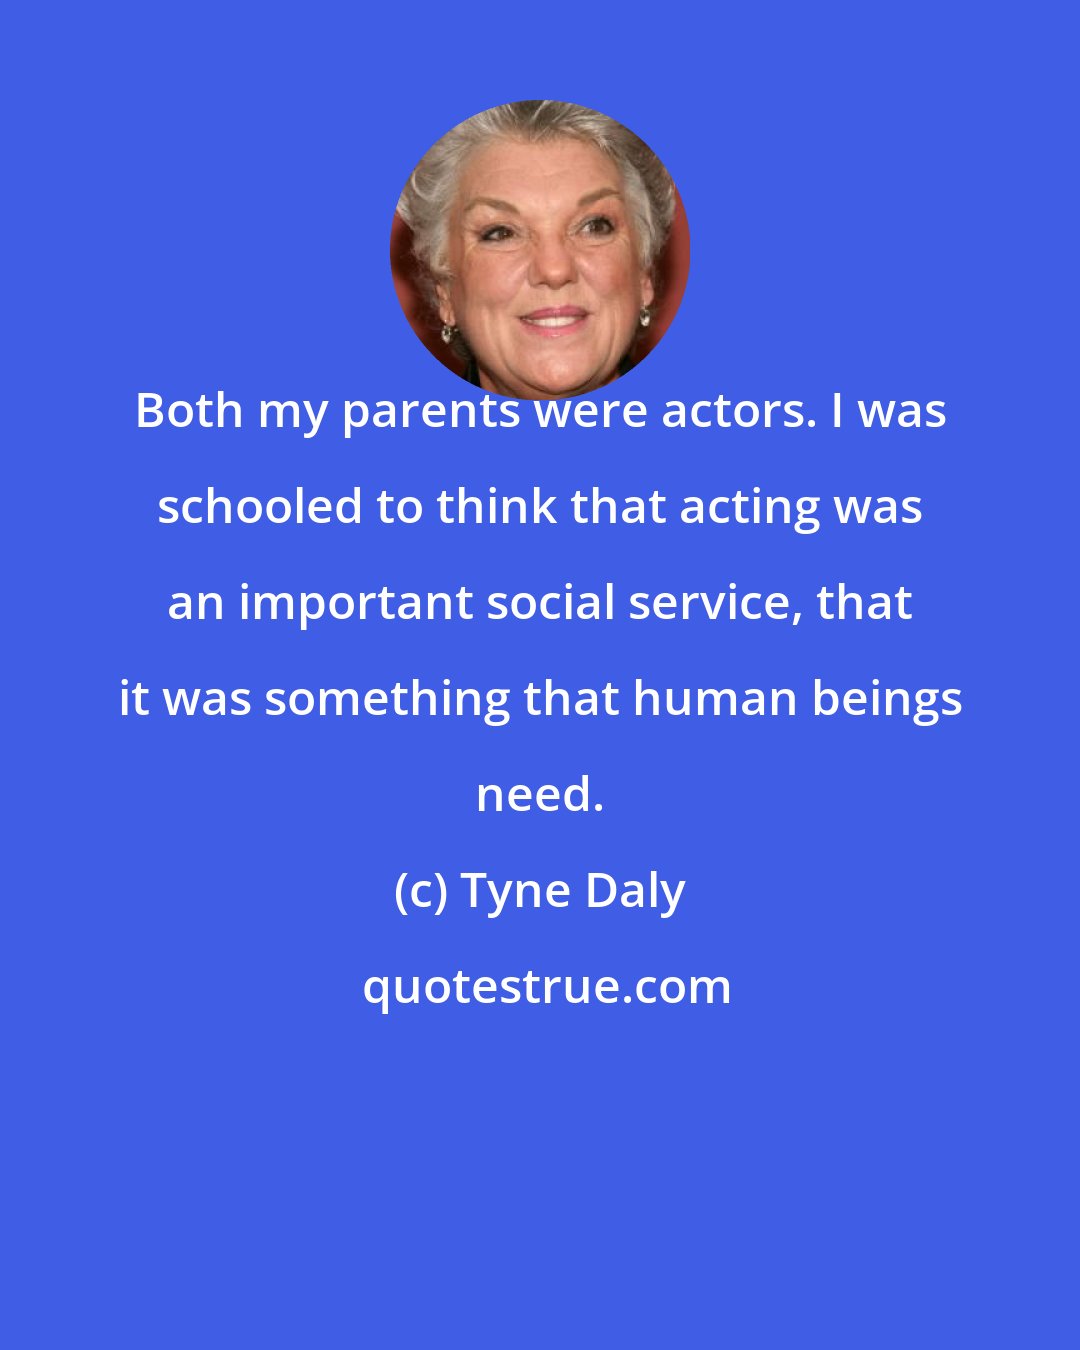 Tyne Daly: Both my parents were actors. I was schooled to think that acting was an important social service, that it was something that human beings need.